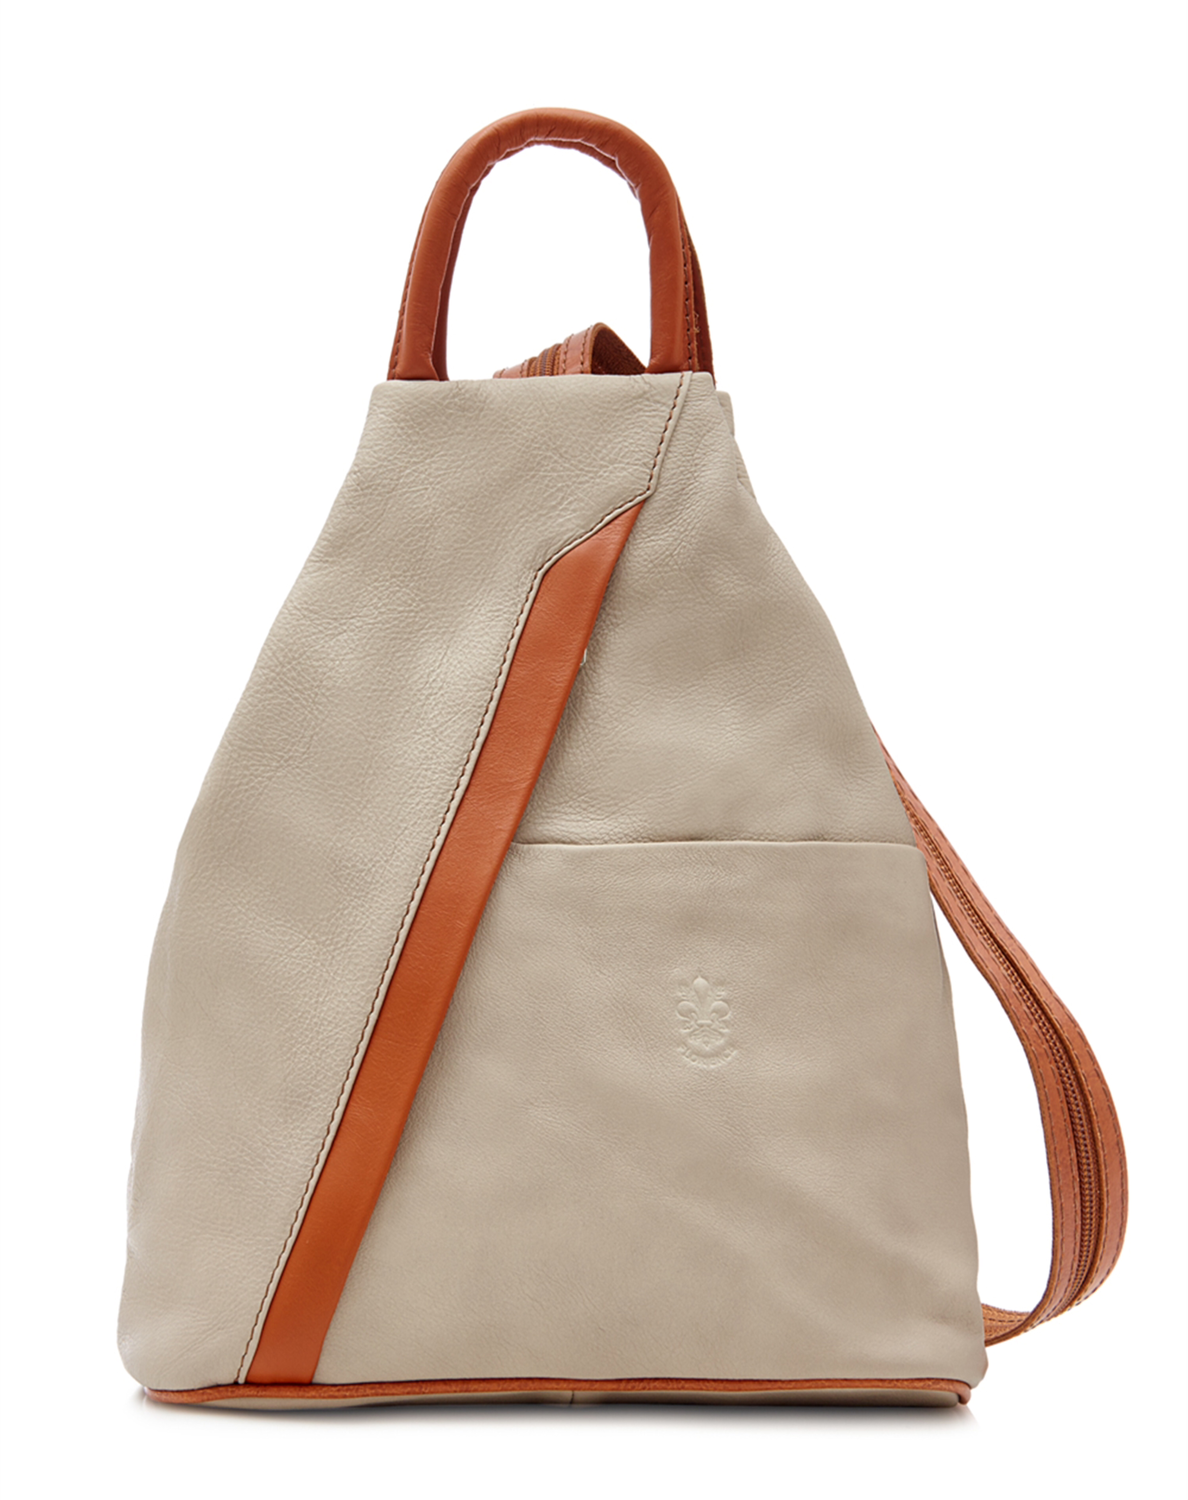 Light Taupe With Tan Trim Soft Leather Backpack